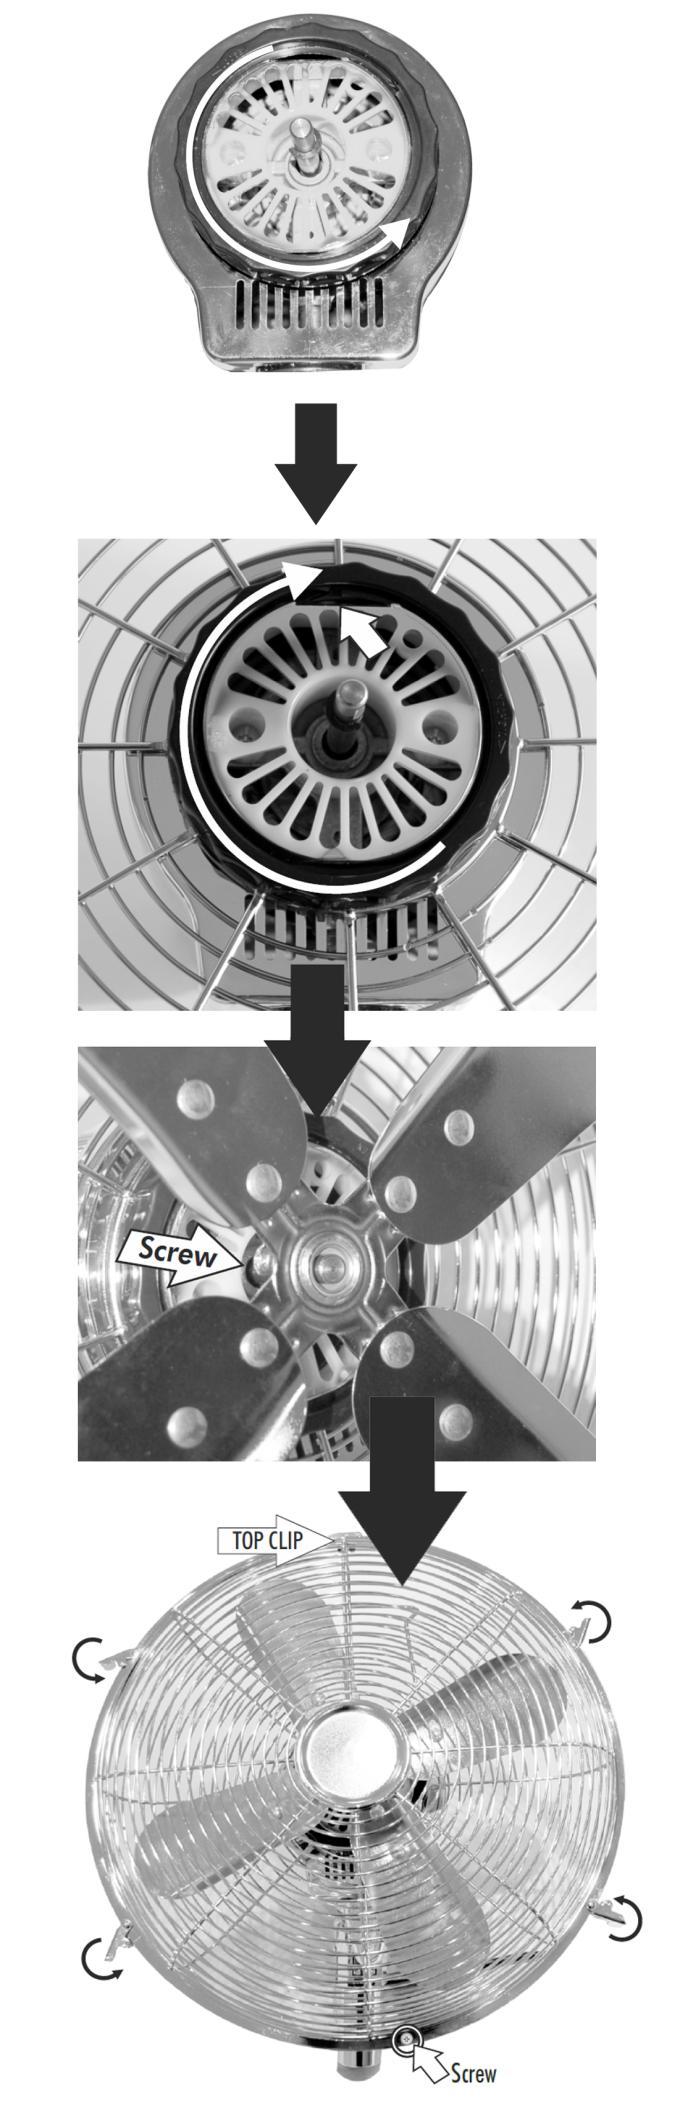 2. ASSEMBLING THE FAN HEAD: a. Unscrew the guard nut from the motor head by rotating it anticlockwise. b. Set the Rear Guard in the proper position (handle uppermost) and screw on the Guard retaining nut until tight.